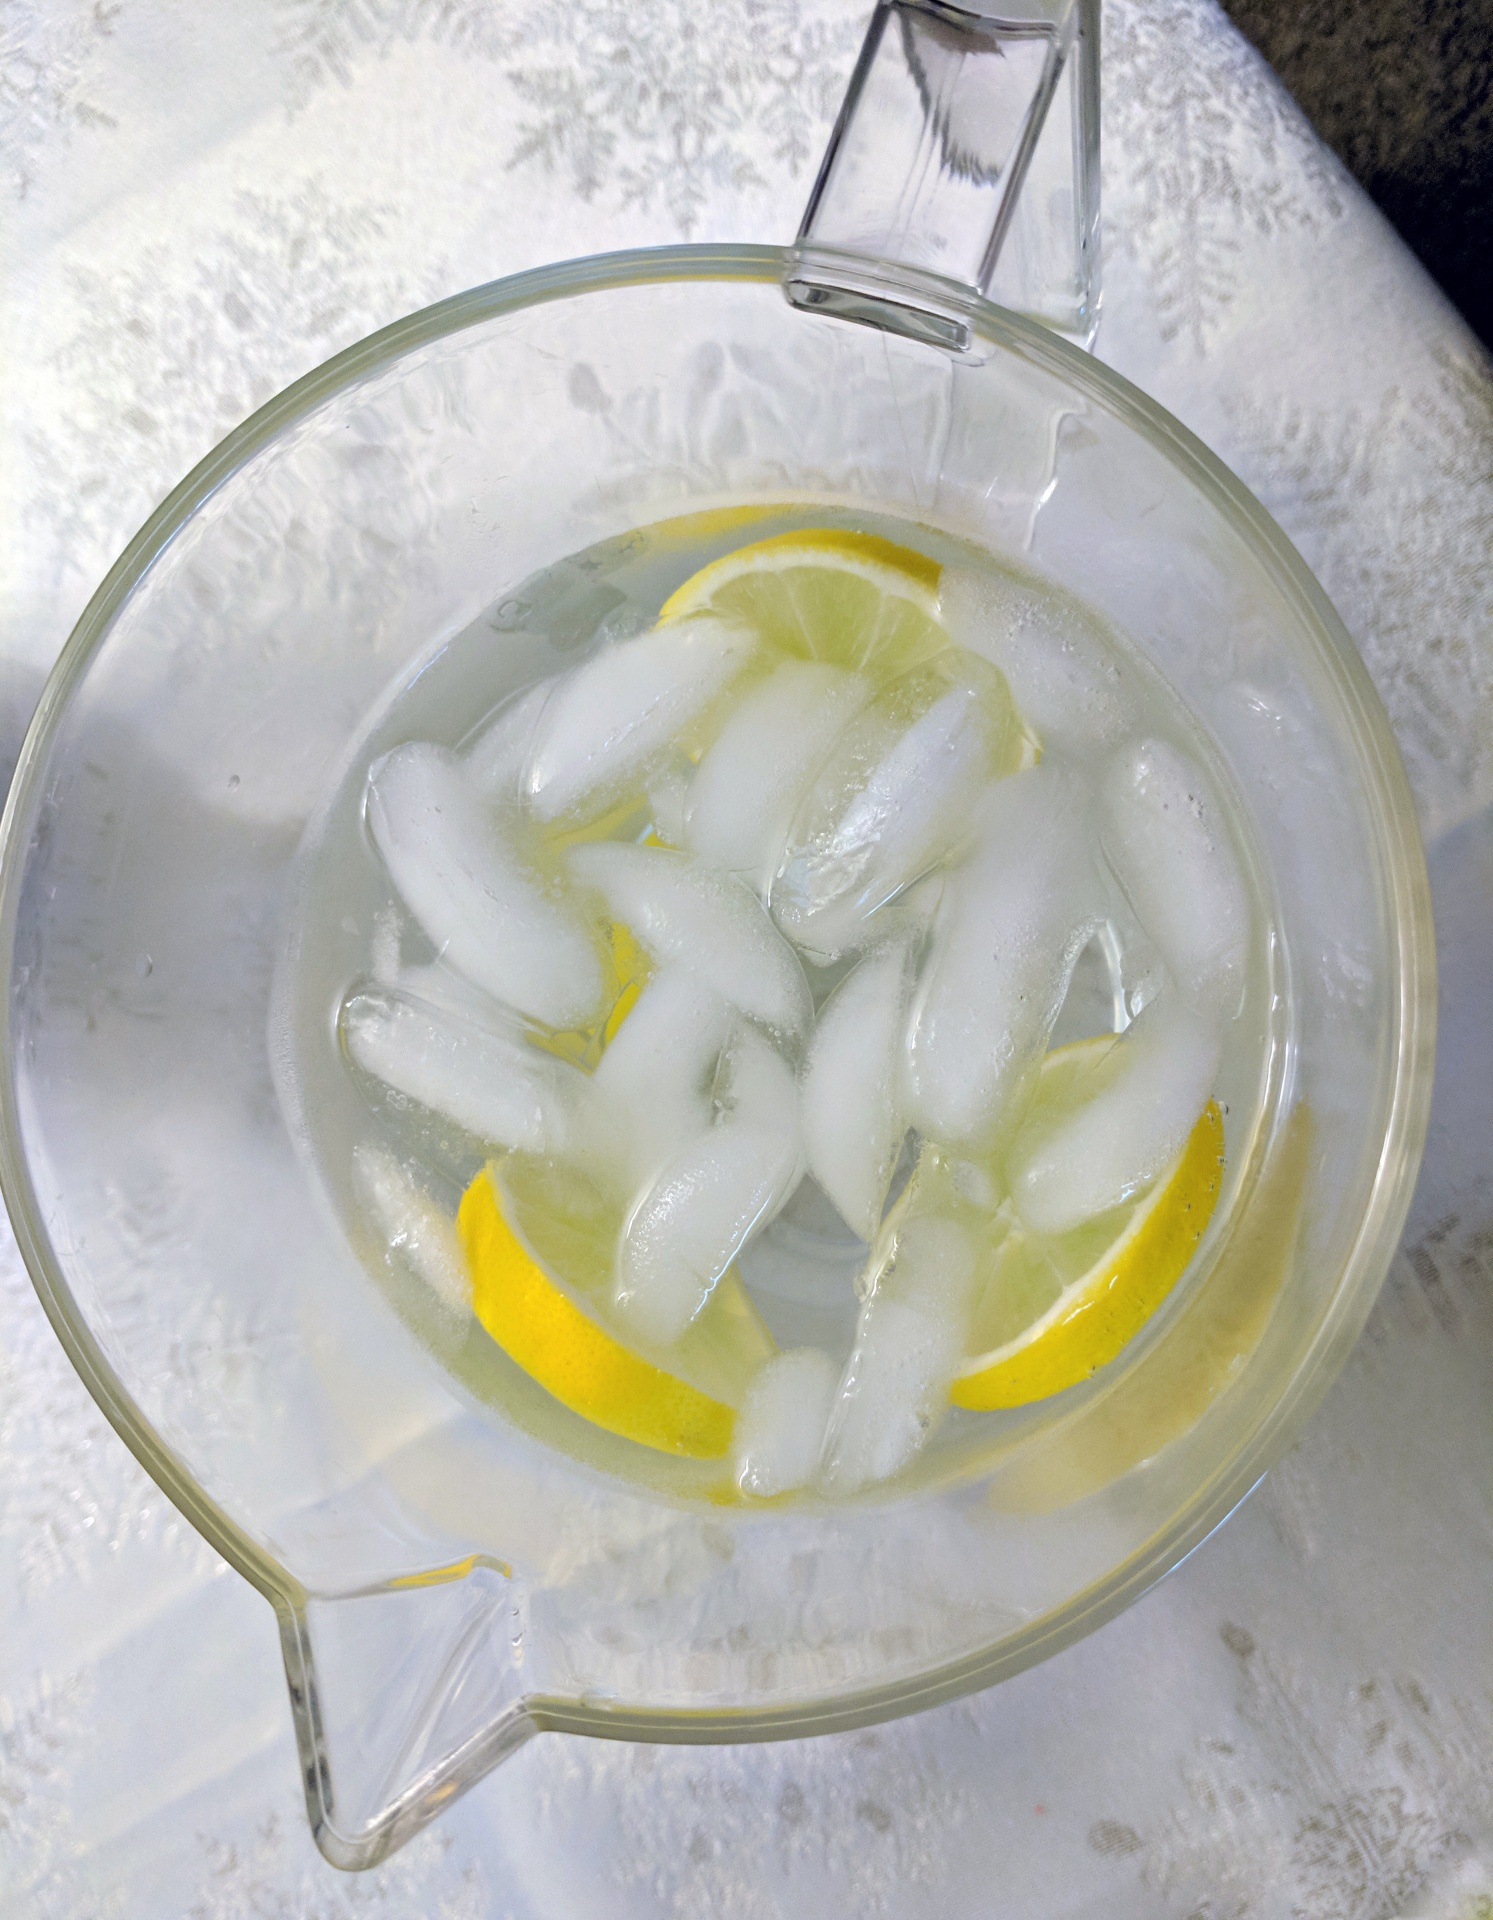 Pitcher of water with ice and slices of lemon